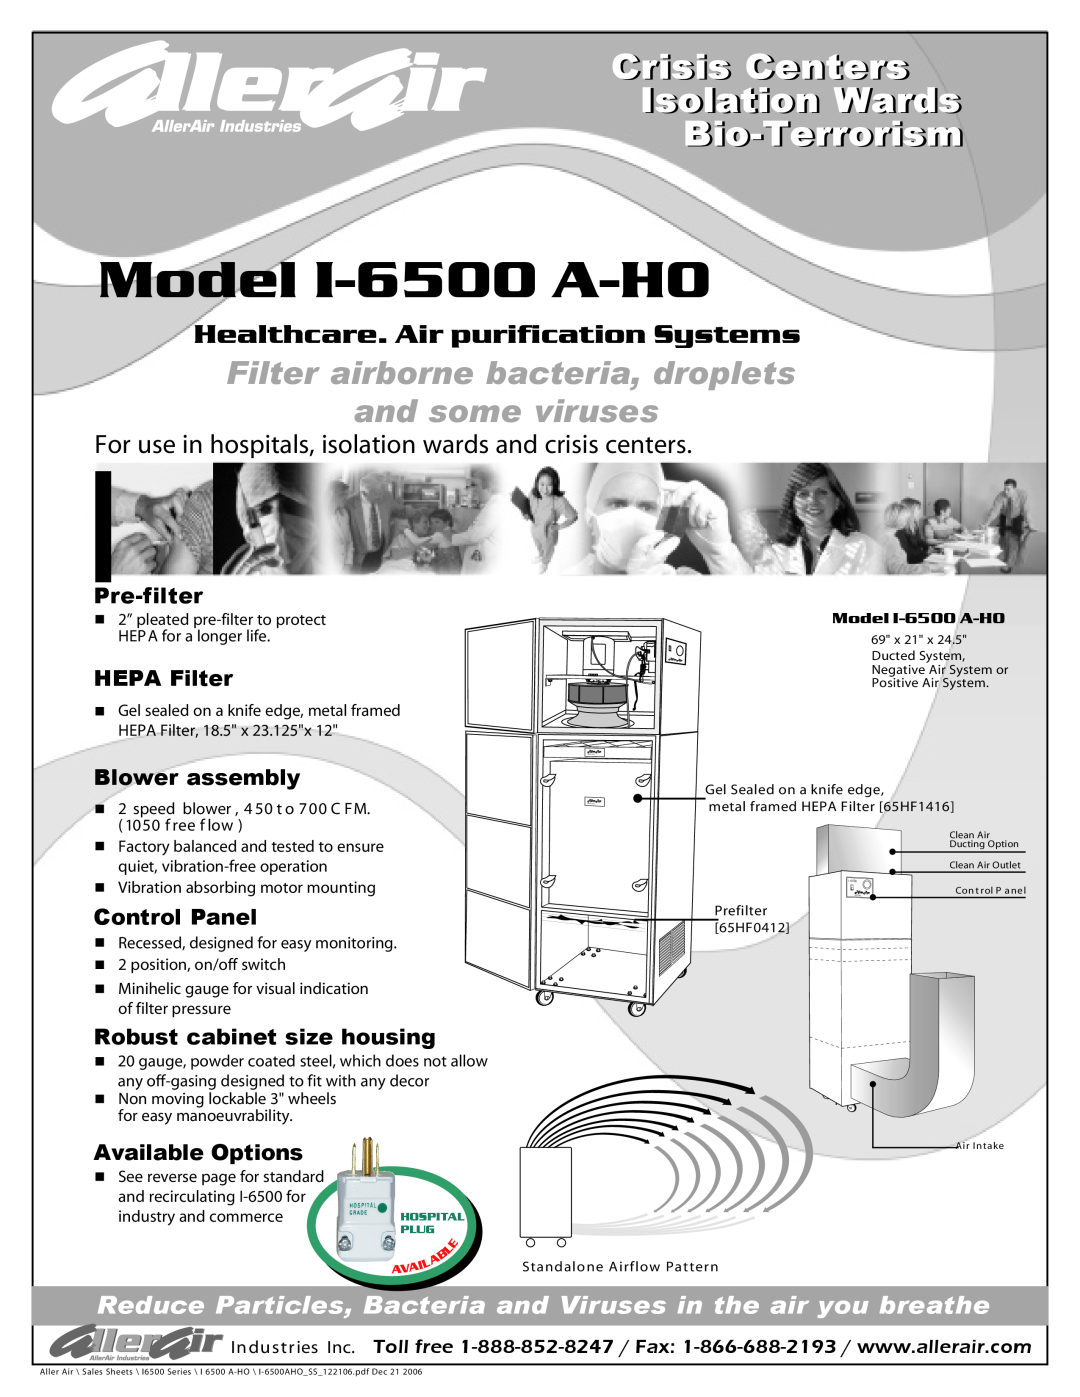 AllerAir manual Model I-6500 A-HO, Crisis Centers Isolation Wards Bio-Terrorism, Healthcare. Air purification Systems 